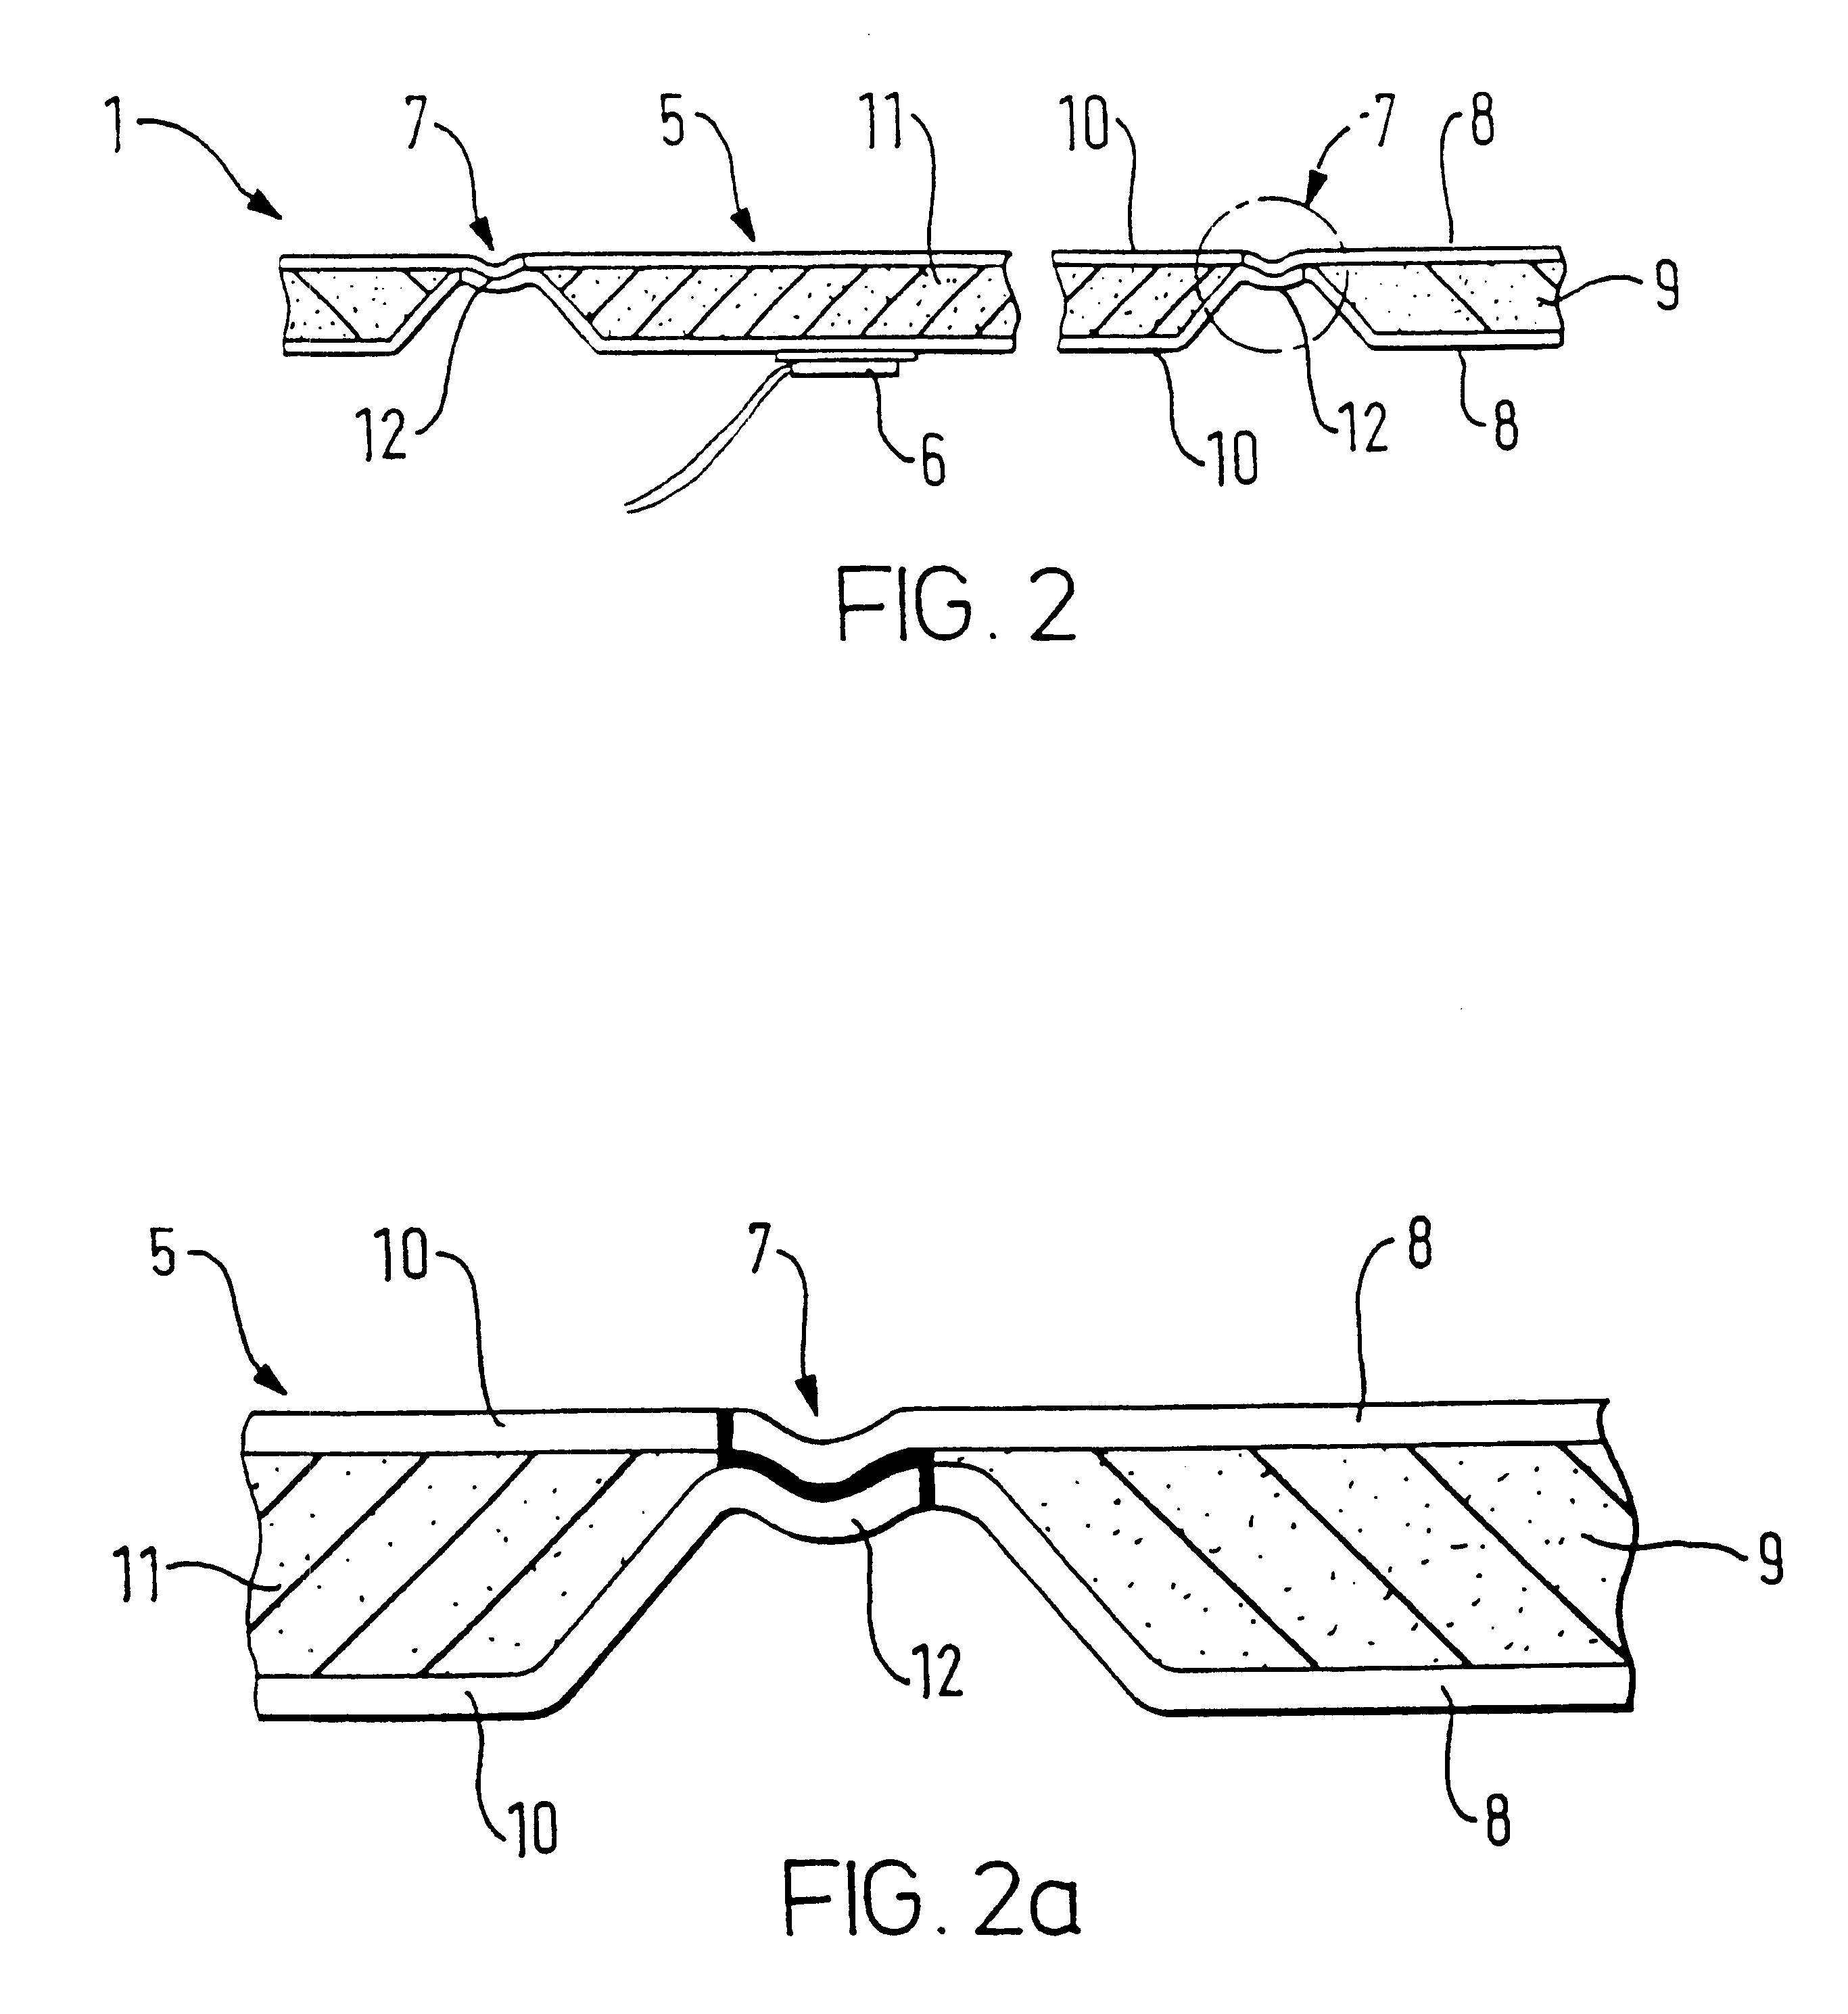 Trim panel comprising an integral acoustic system